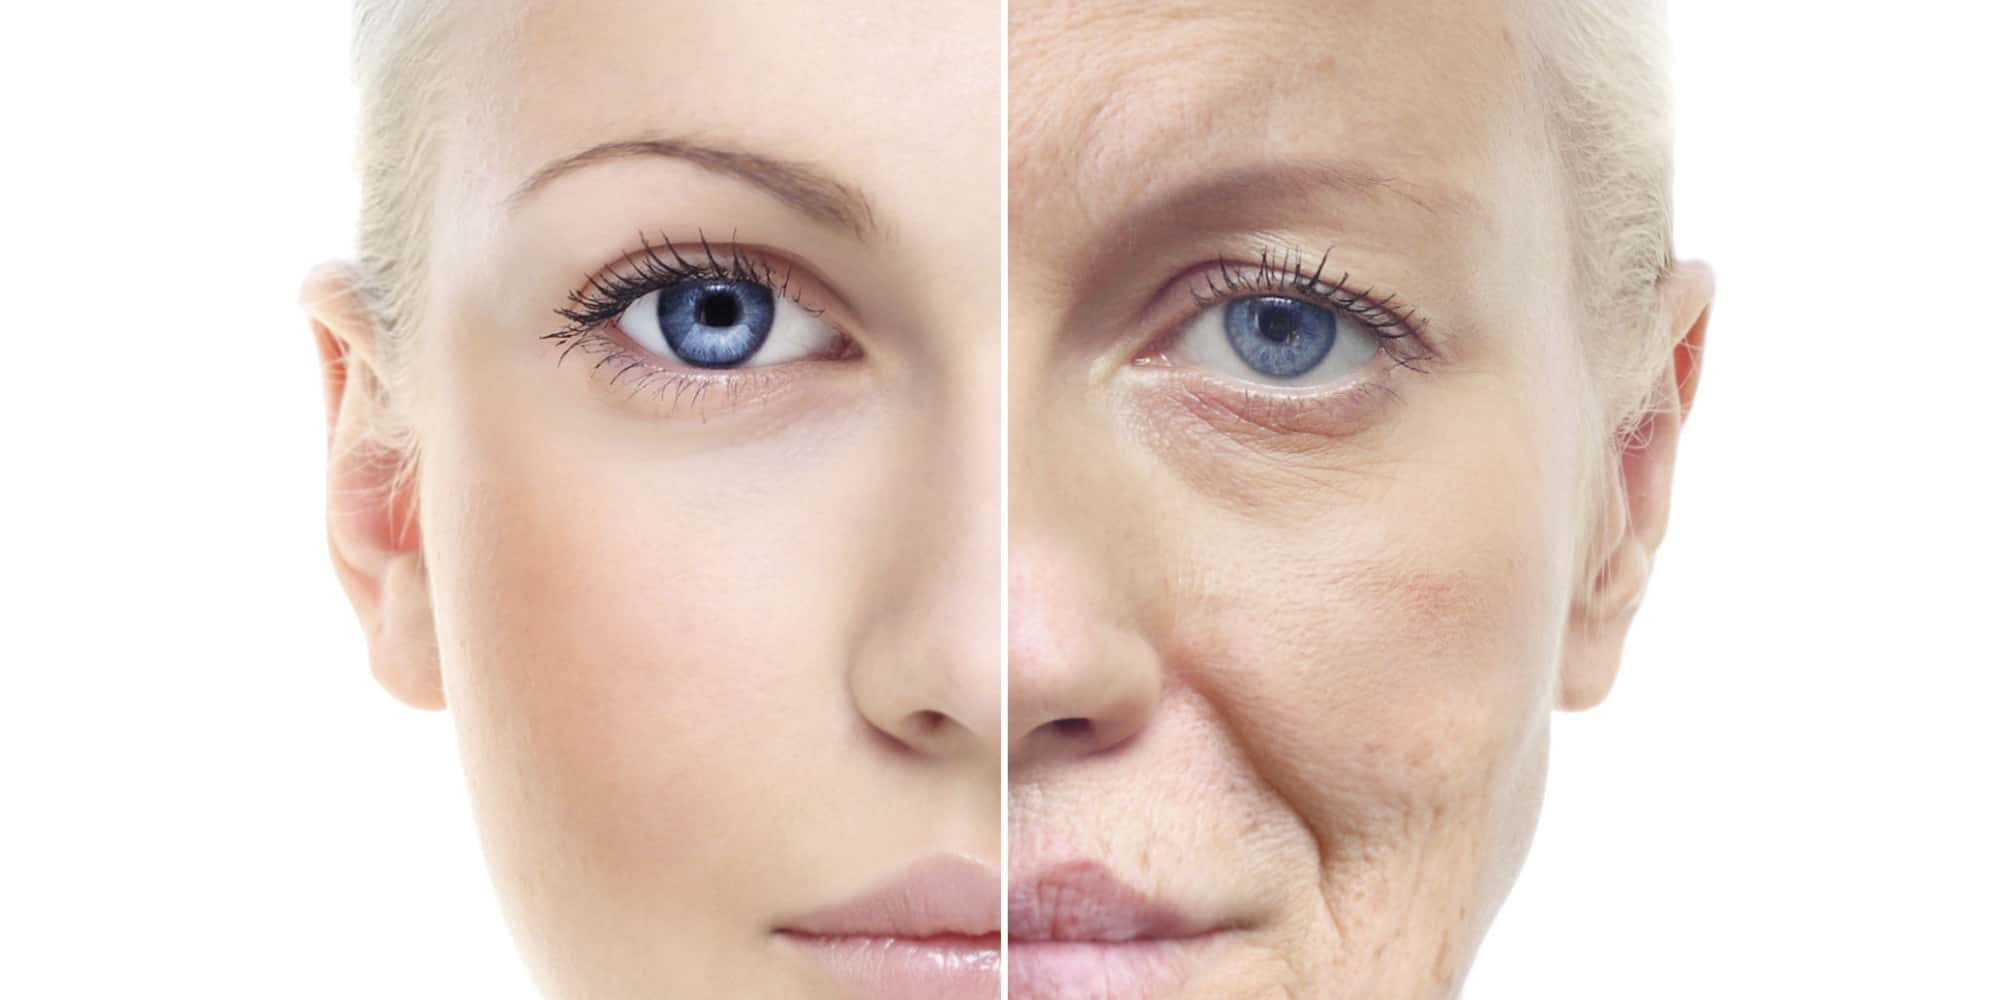 Skin Tightening With Embrace RF Technology For Anti-Ageing Benefits